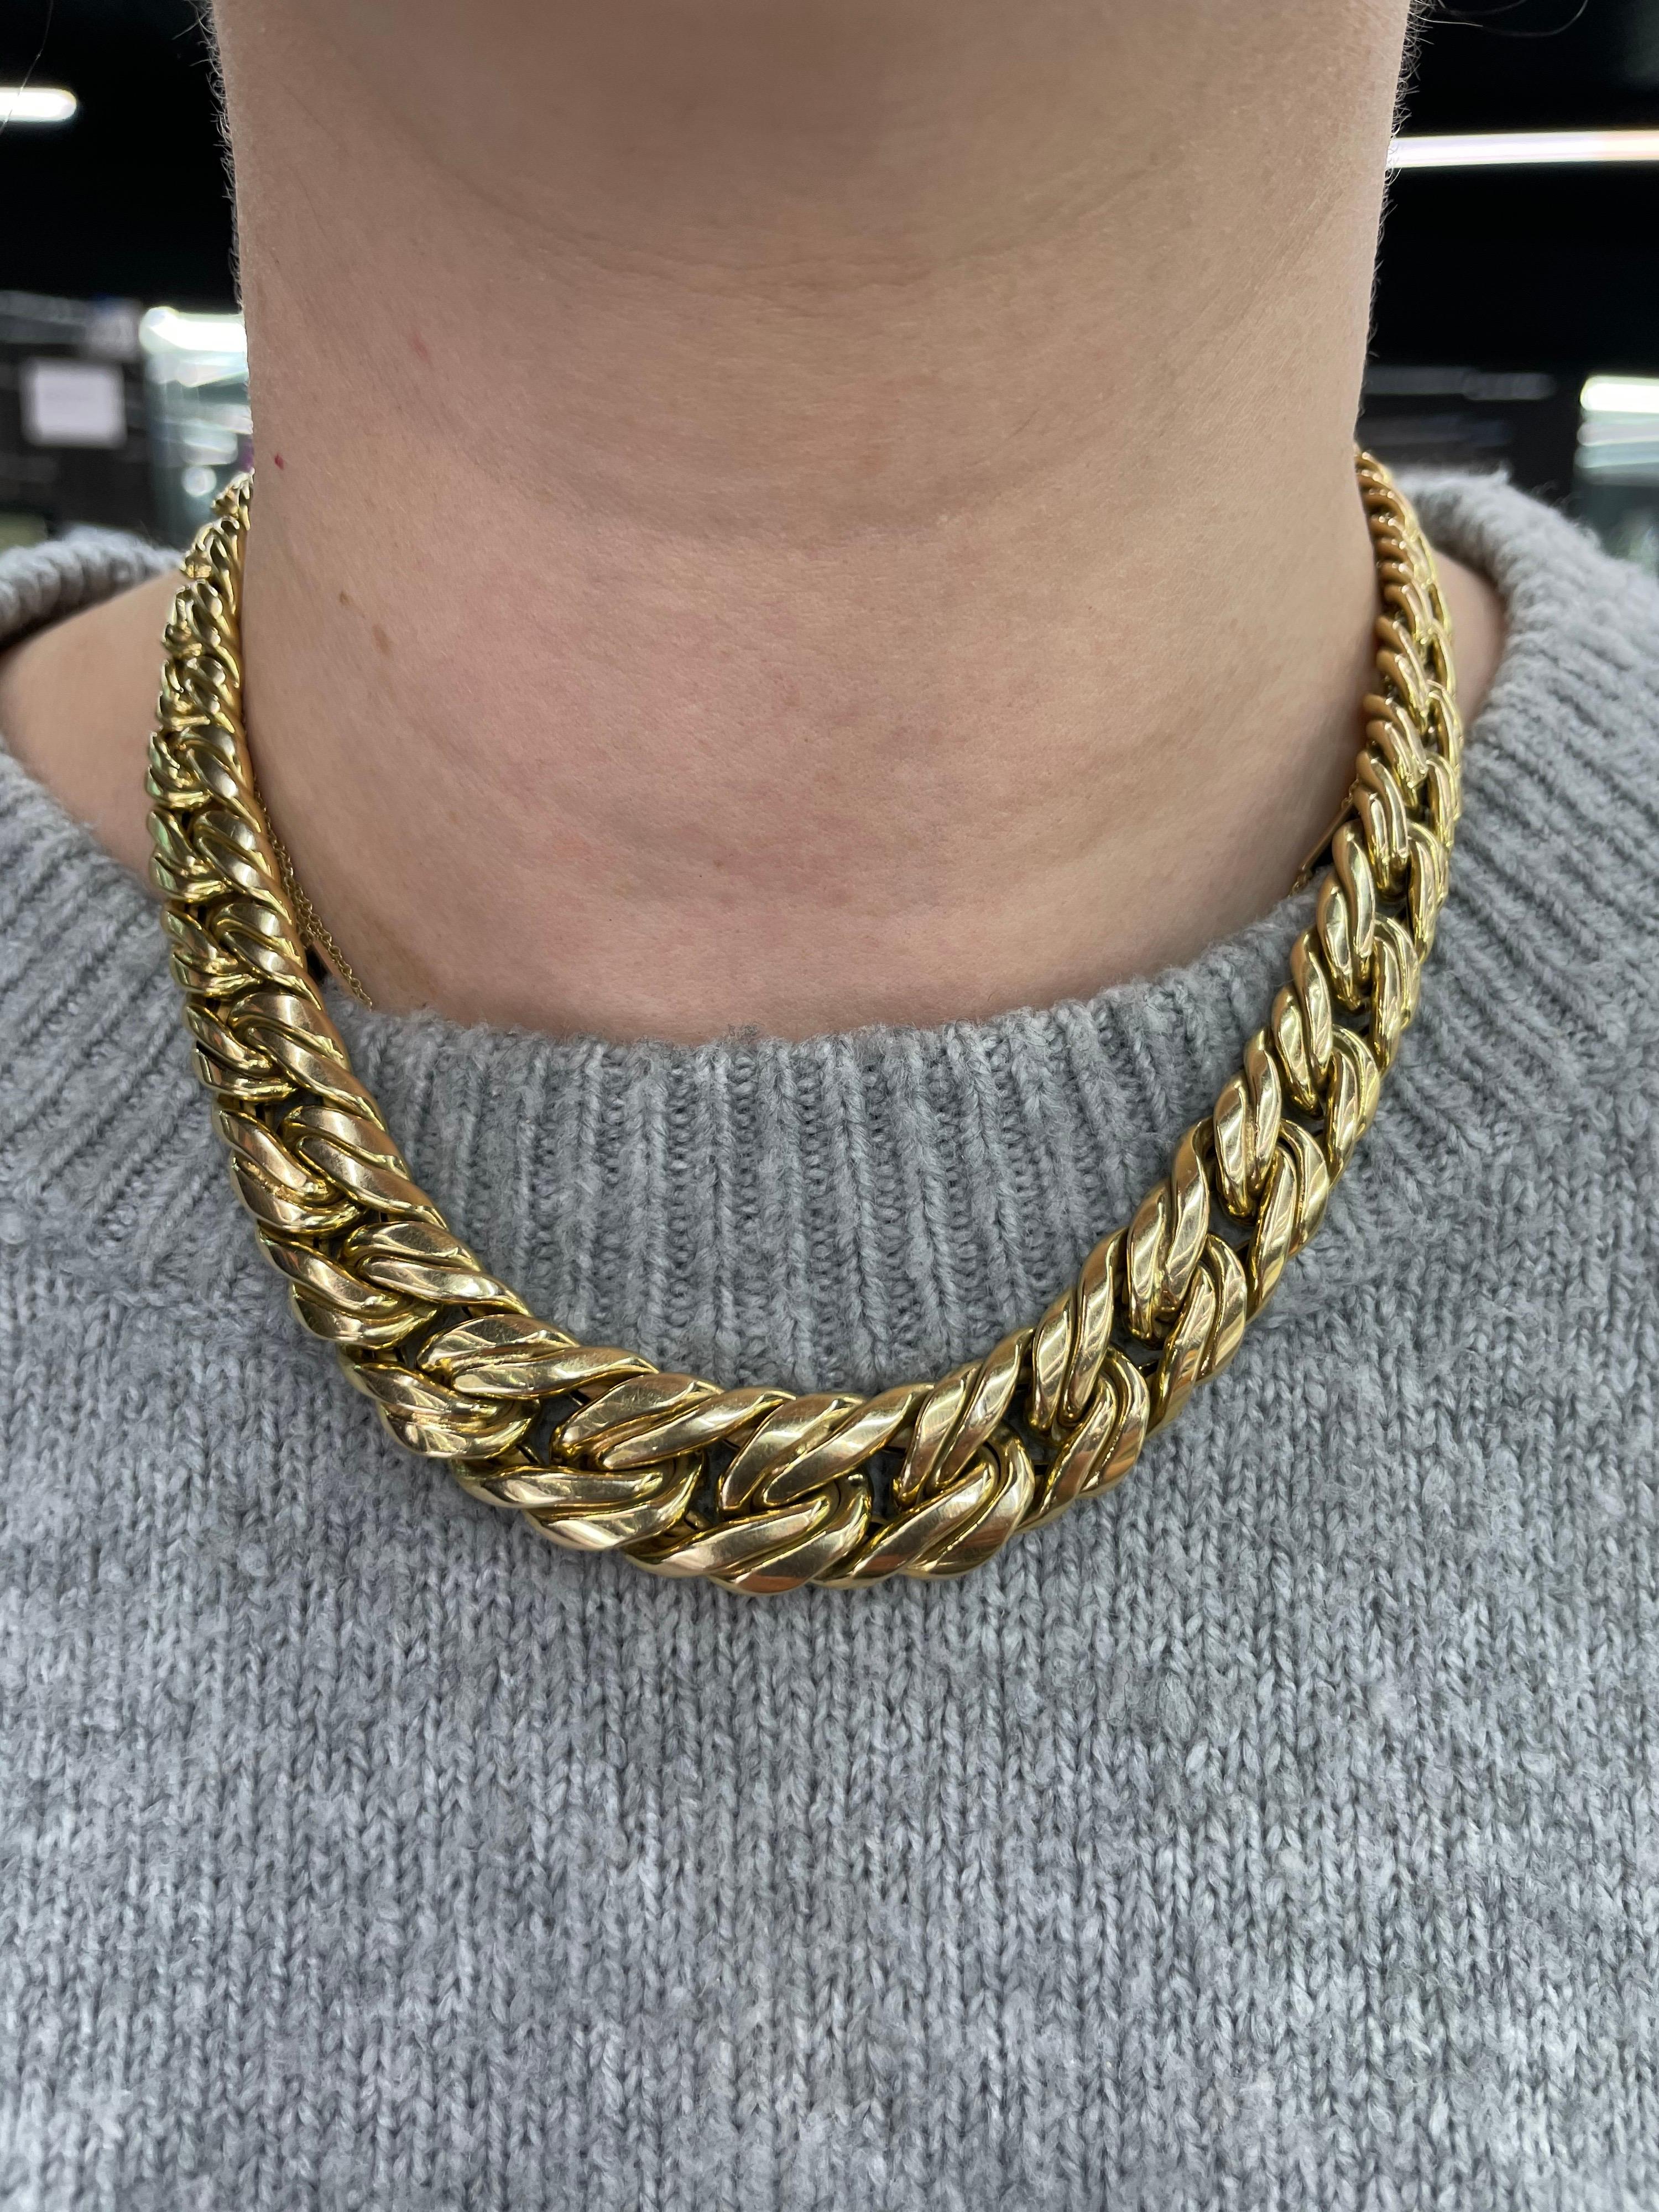 14 Karat yellow gold necklace featuring a graduated braided motif style and weighs 56 grams. Made in Italy.
Smallest link 3/8 inches
Biggest link 9/16 inches. 
More gold necklace available in stock.